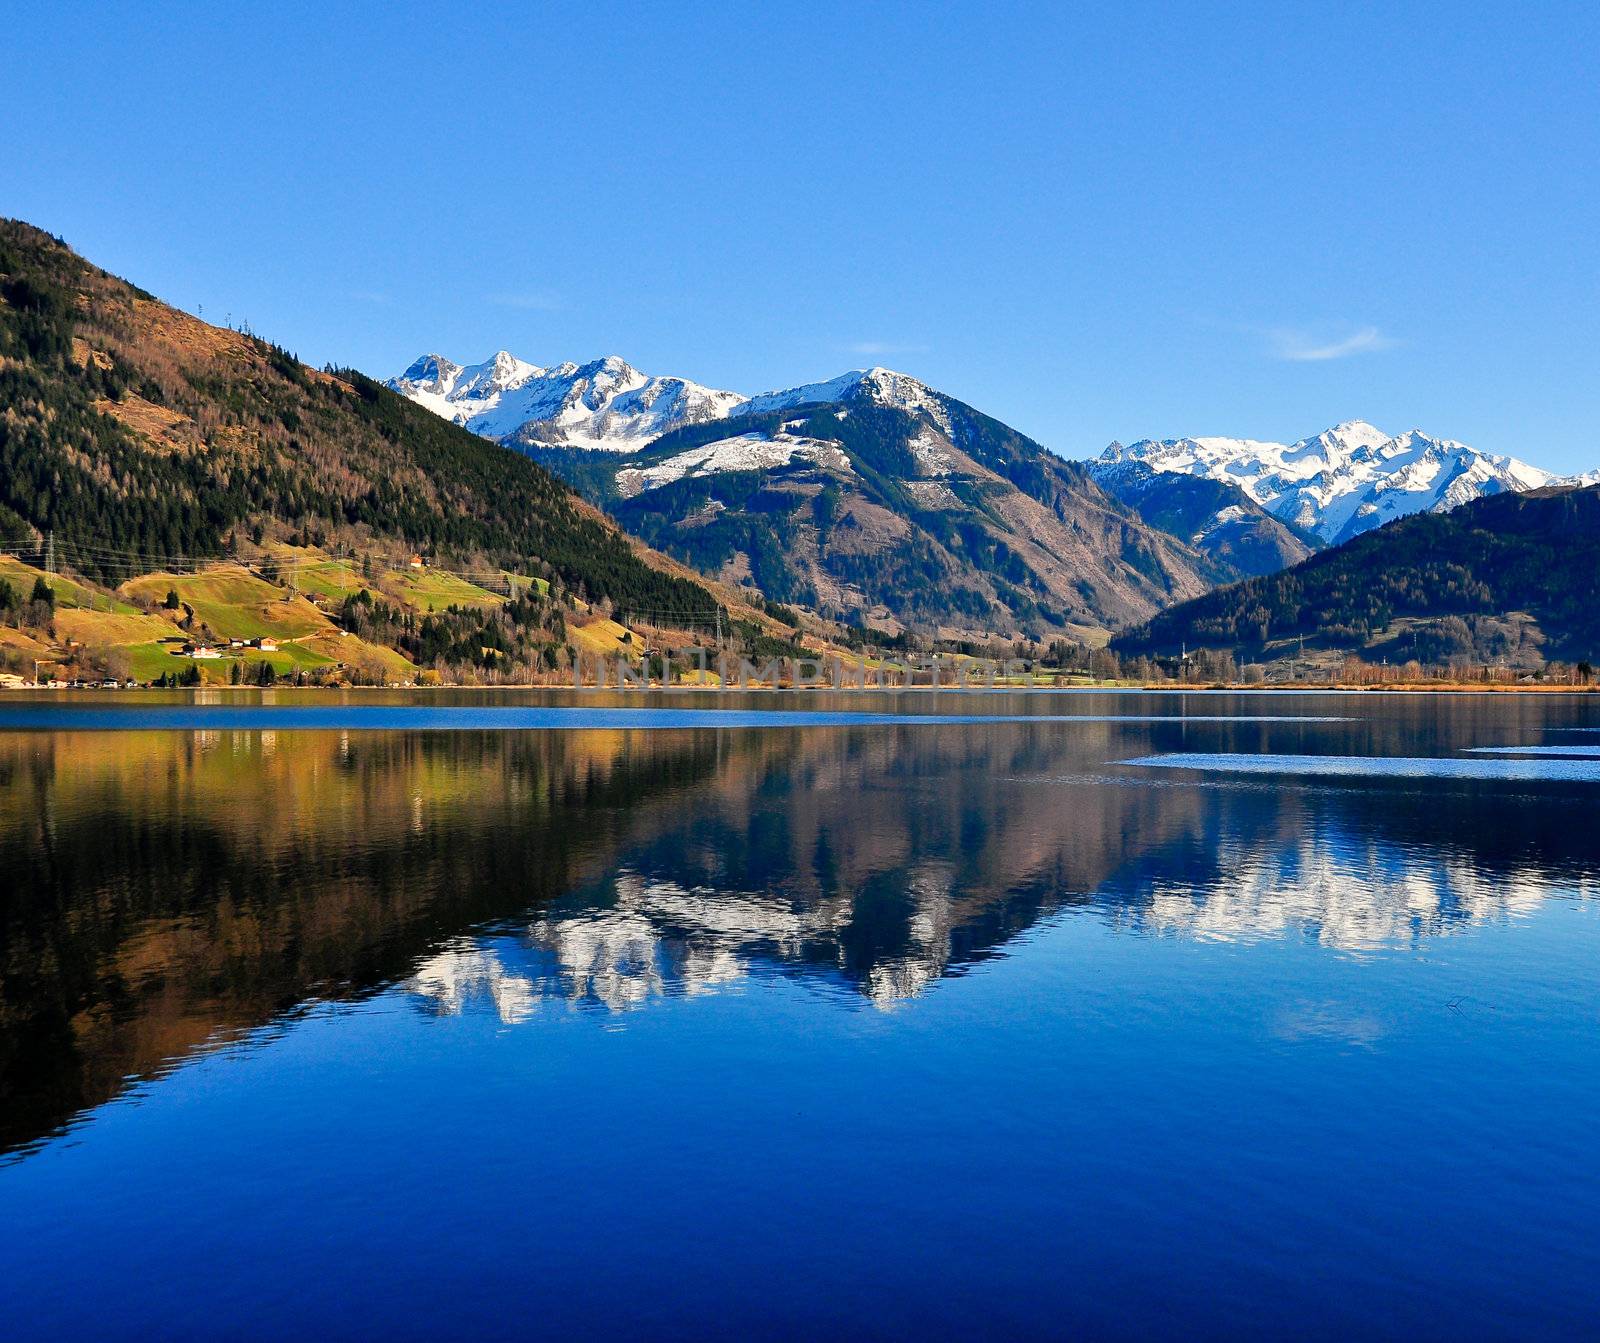 Blue mountain lake landscape view with mountain reflection, Zell am See, Austria